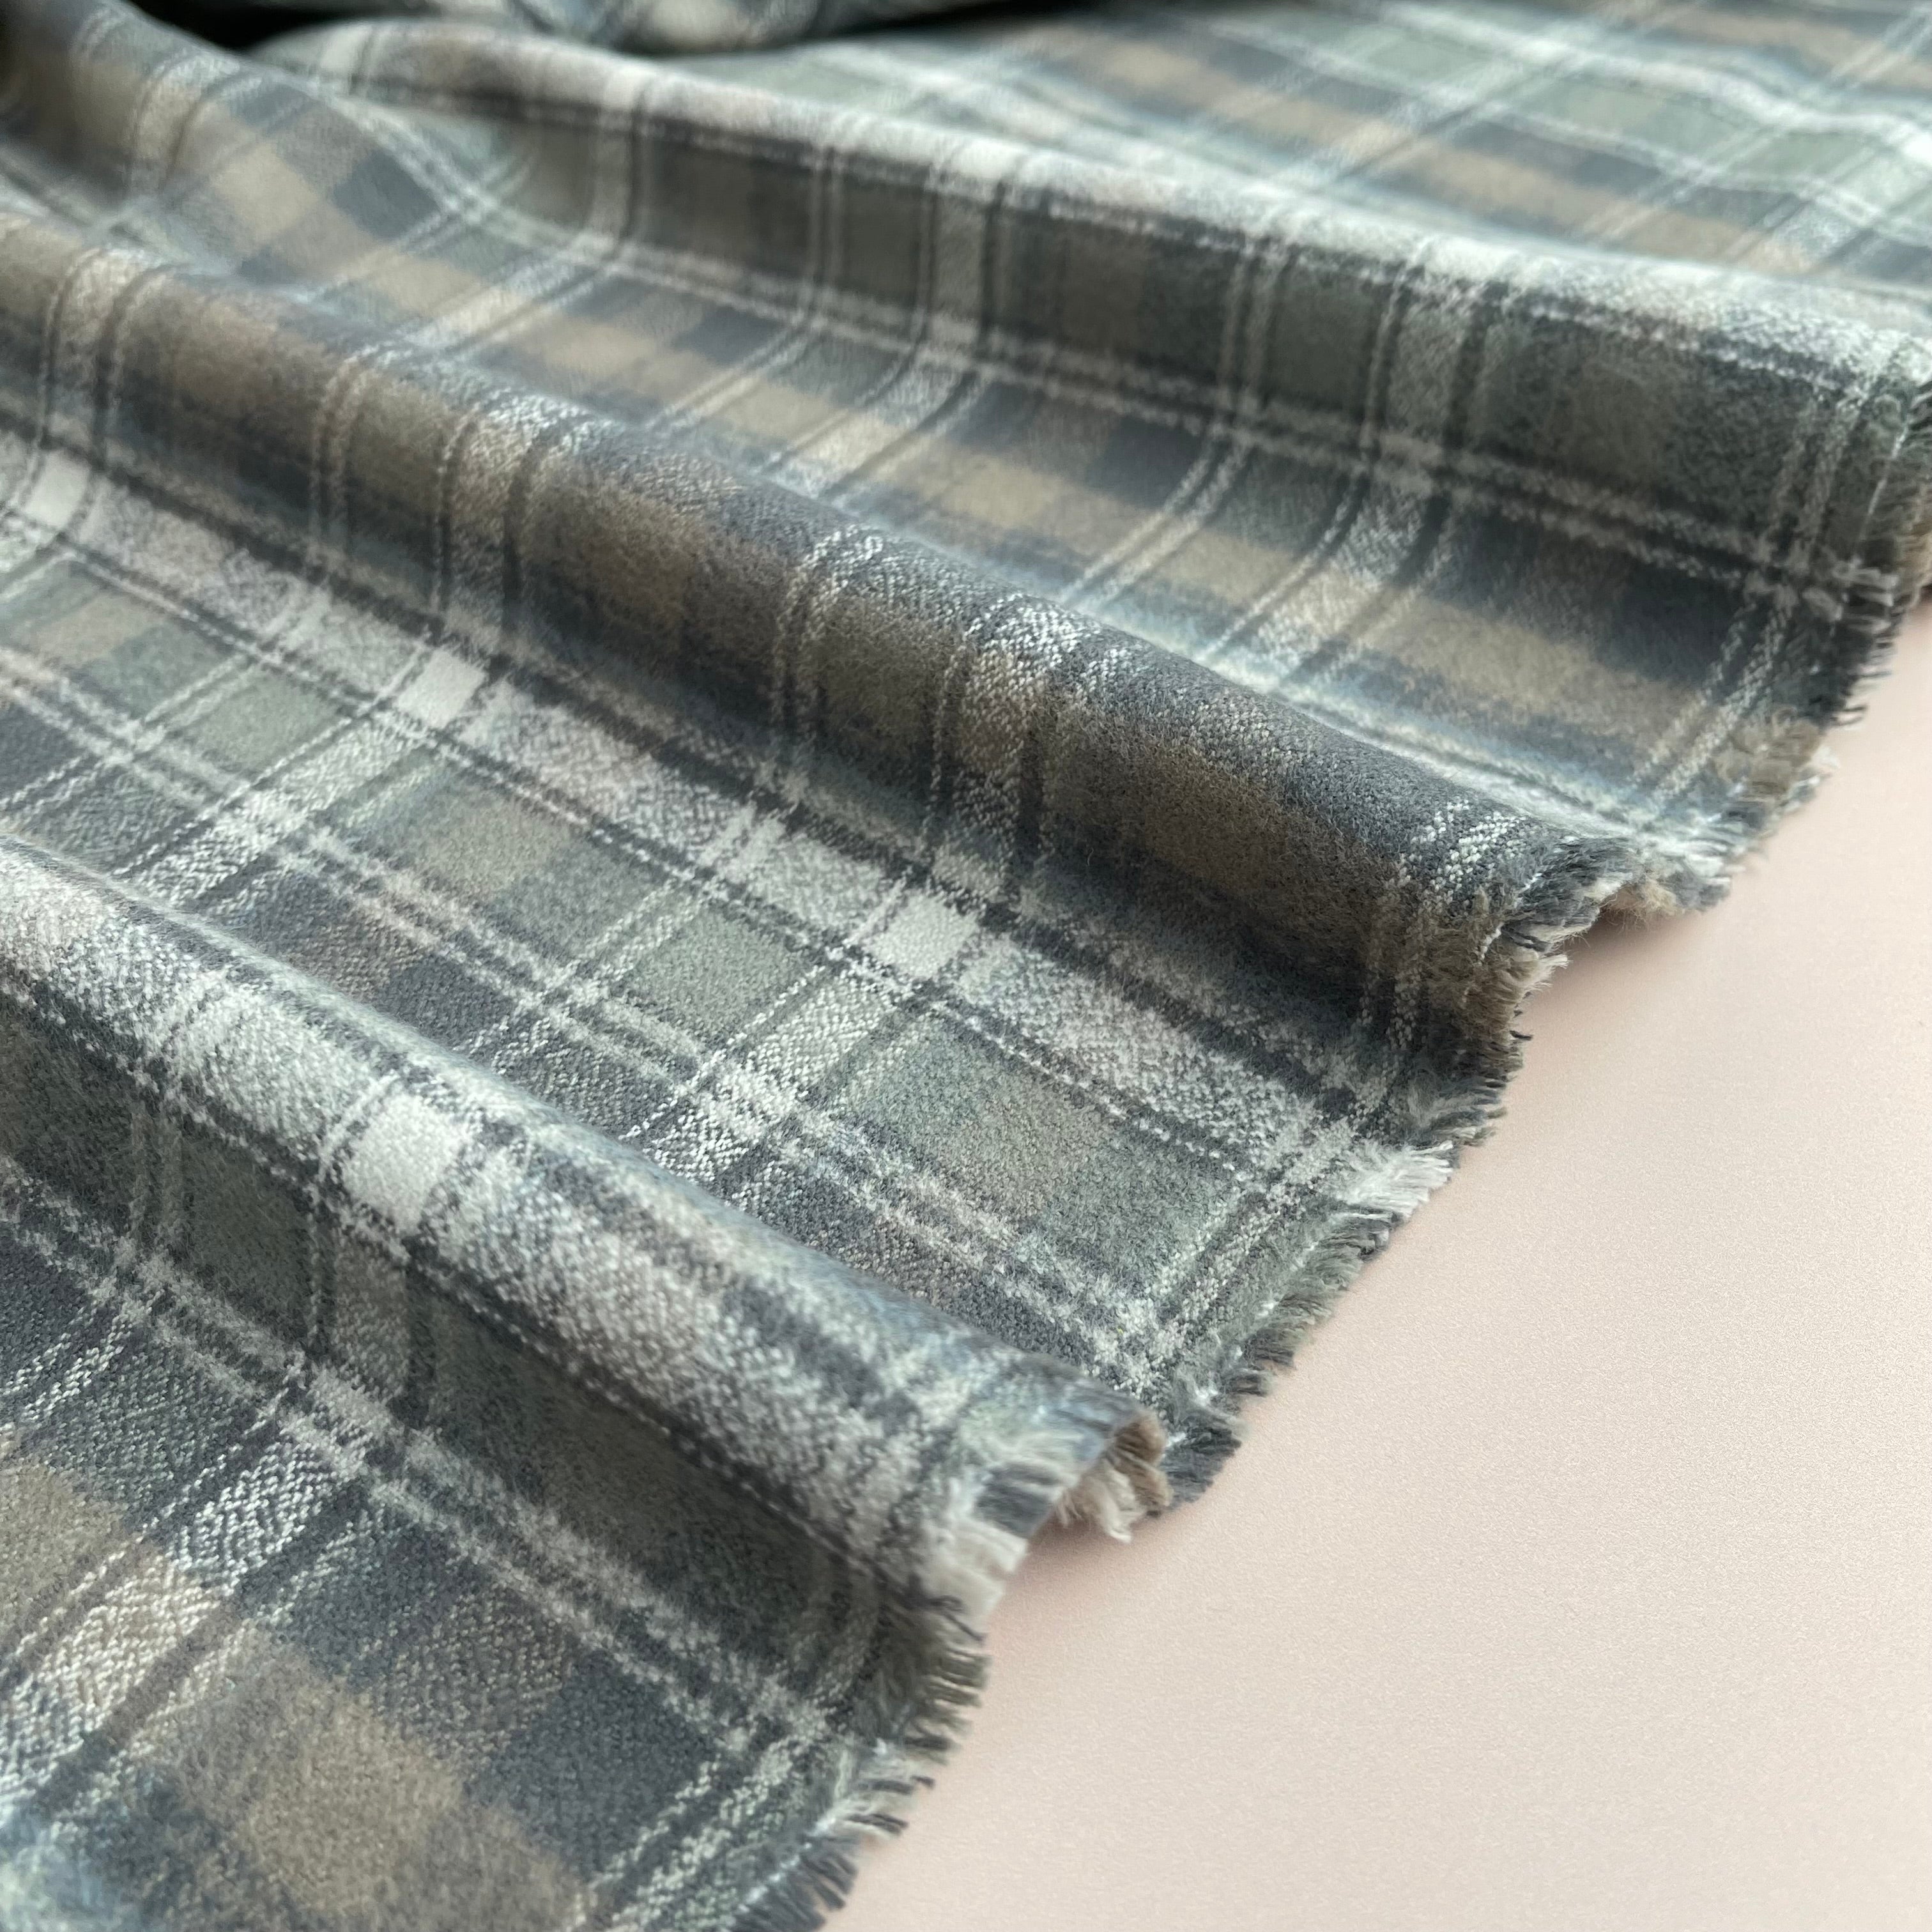 REMNANT 1 metre - Storm Mammoth Organic Cotton Flannel